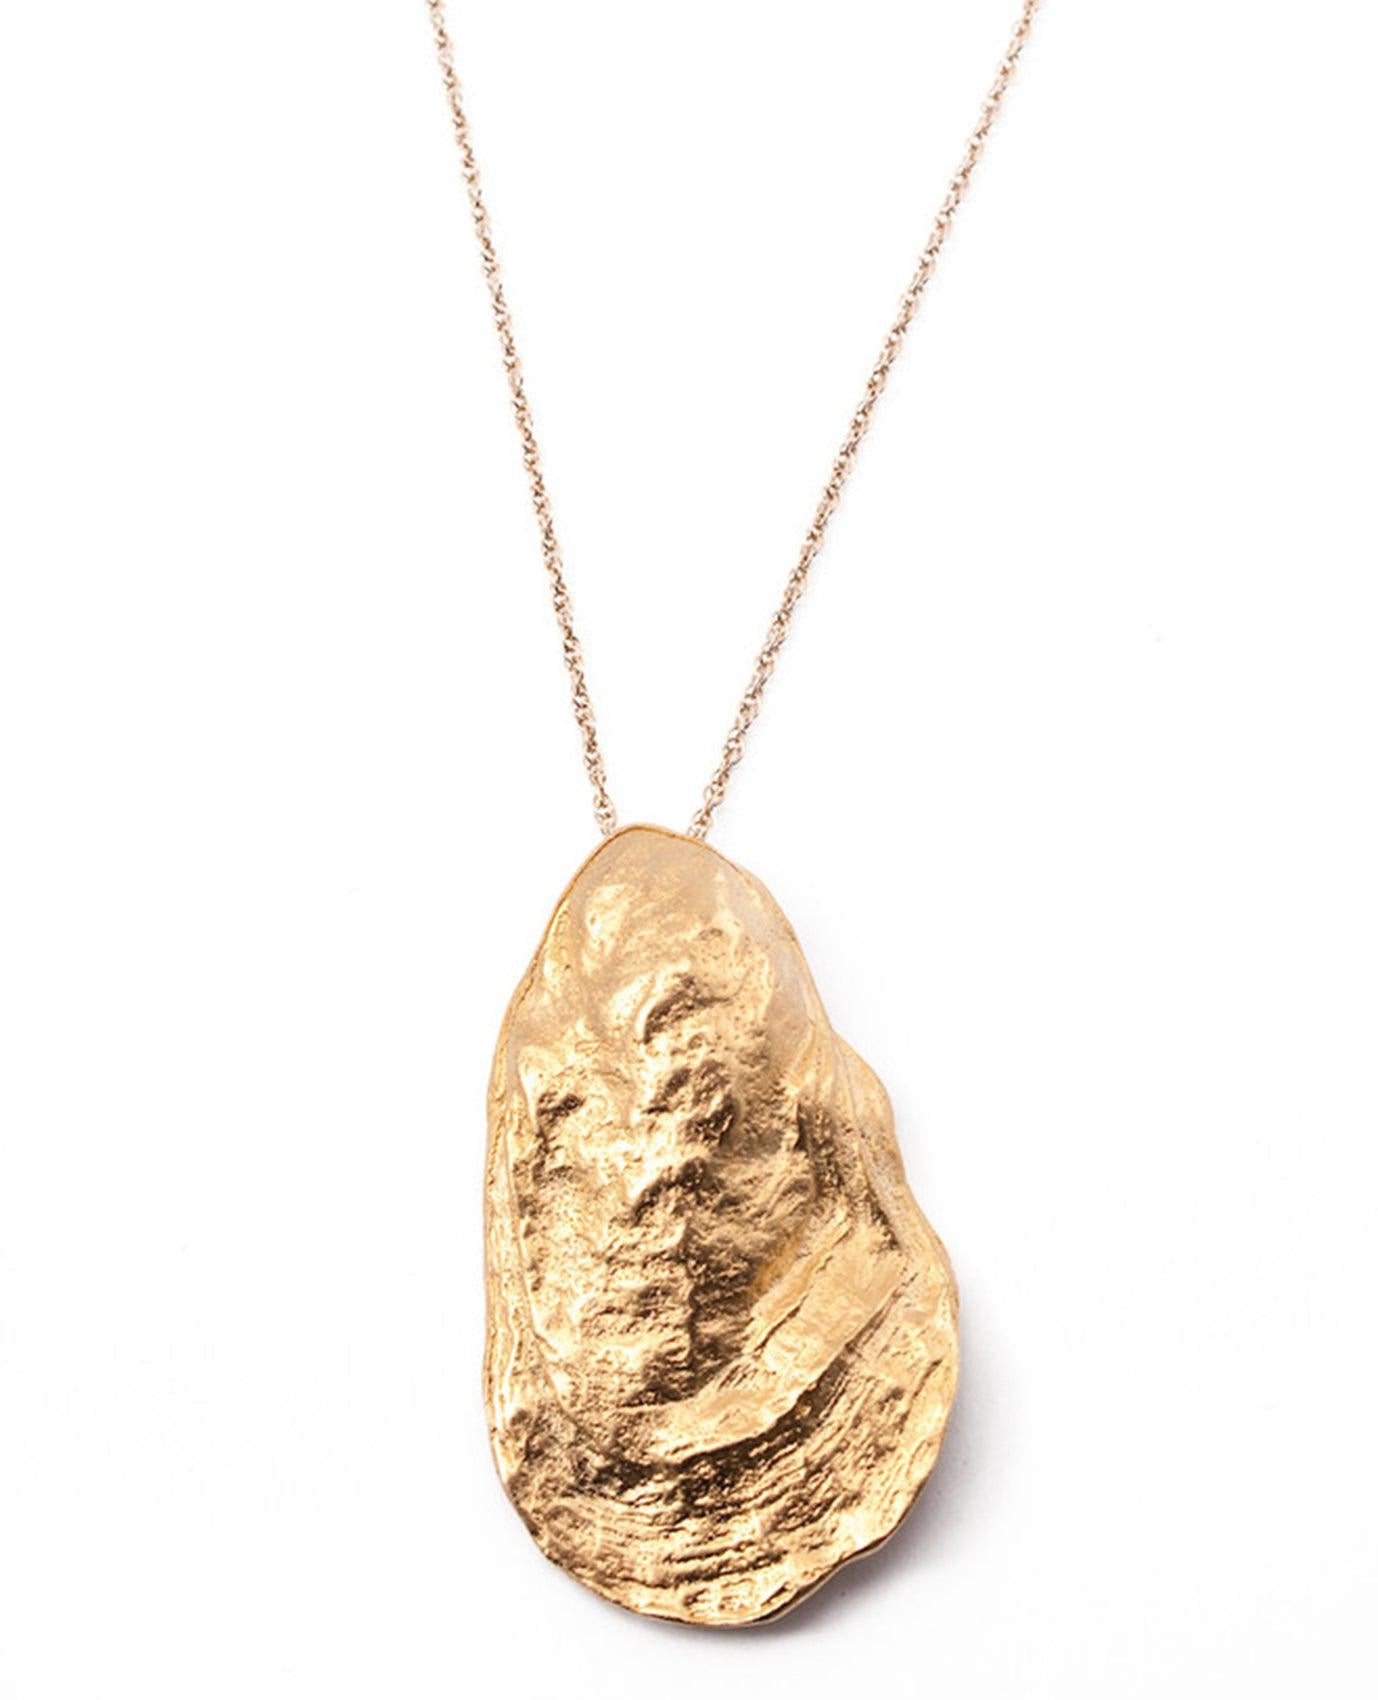 Charleston Oyster Necklace